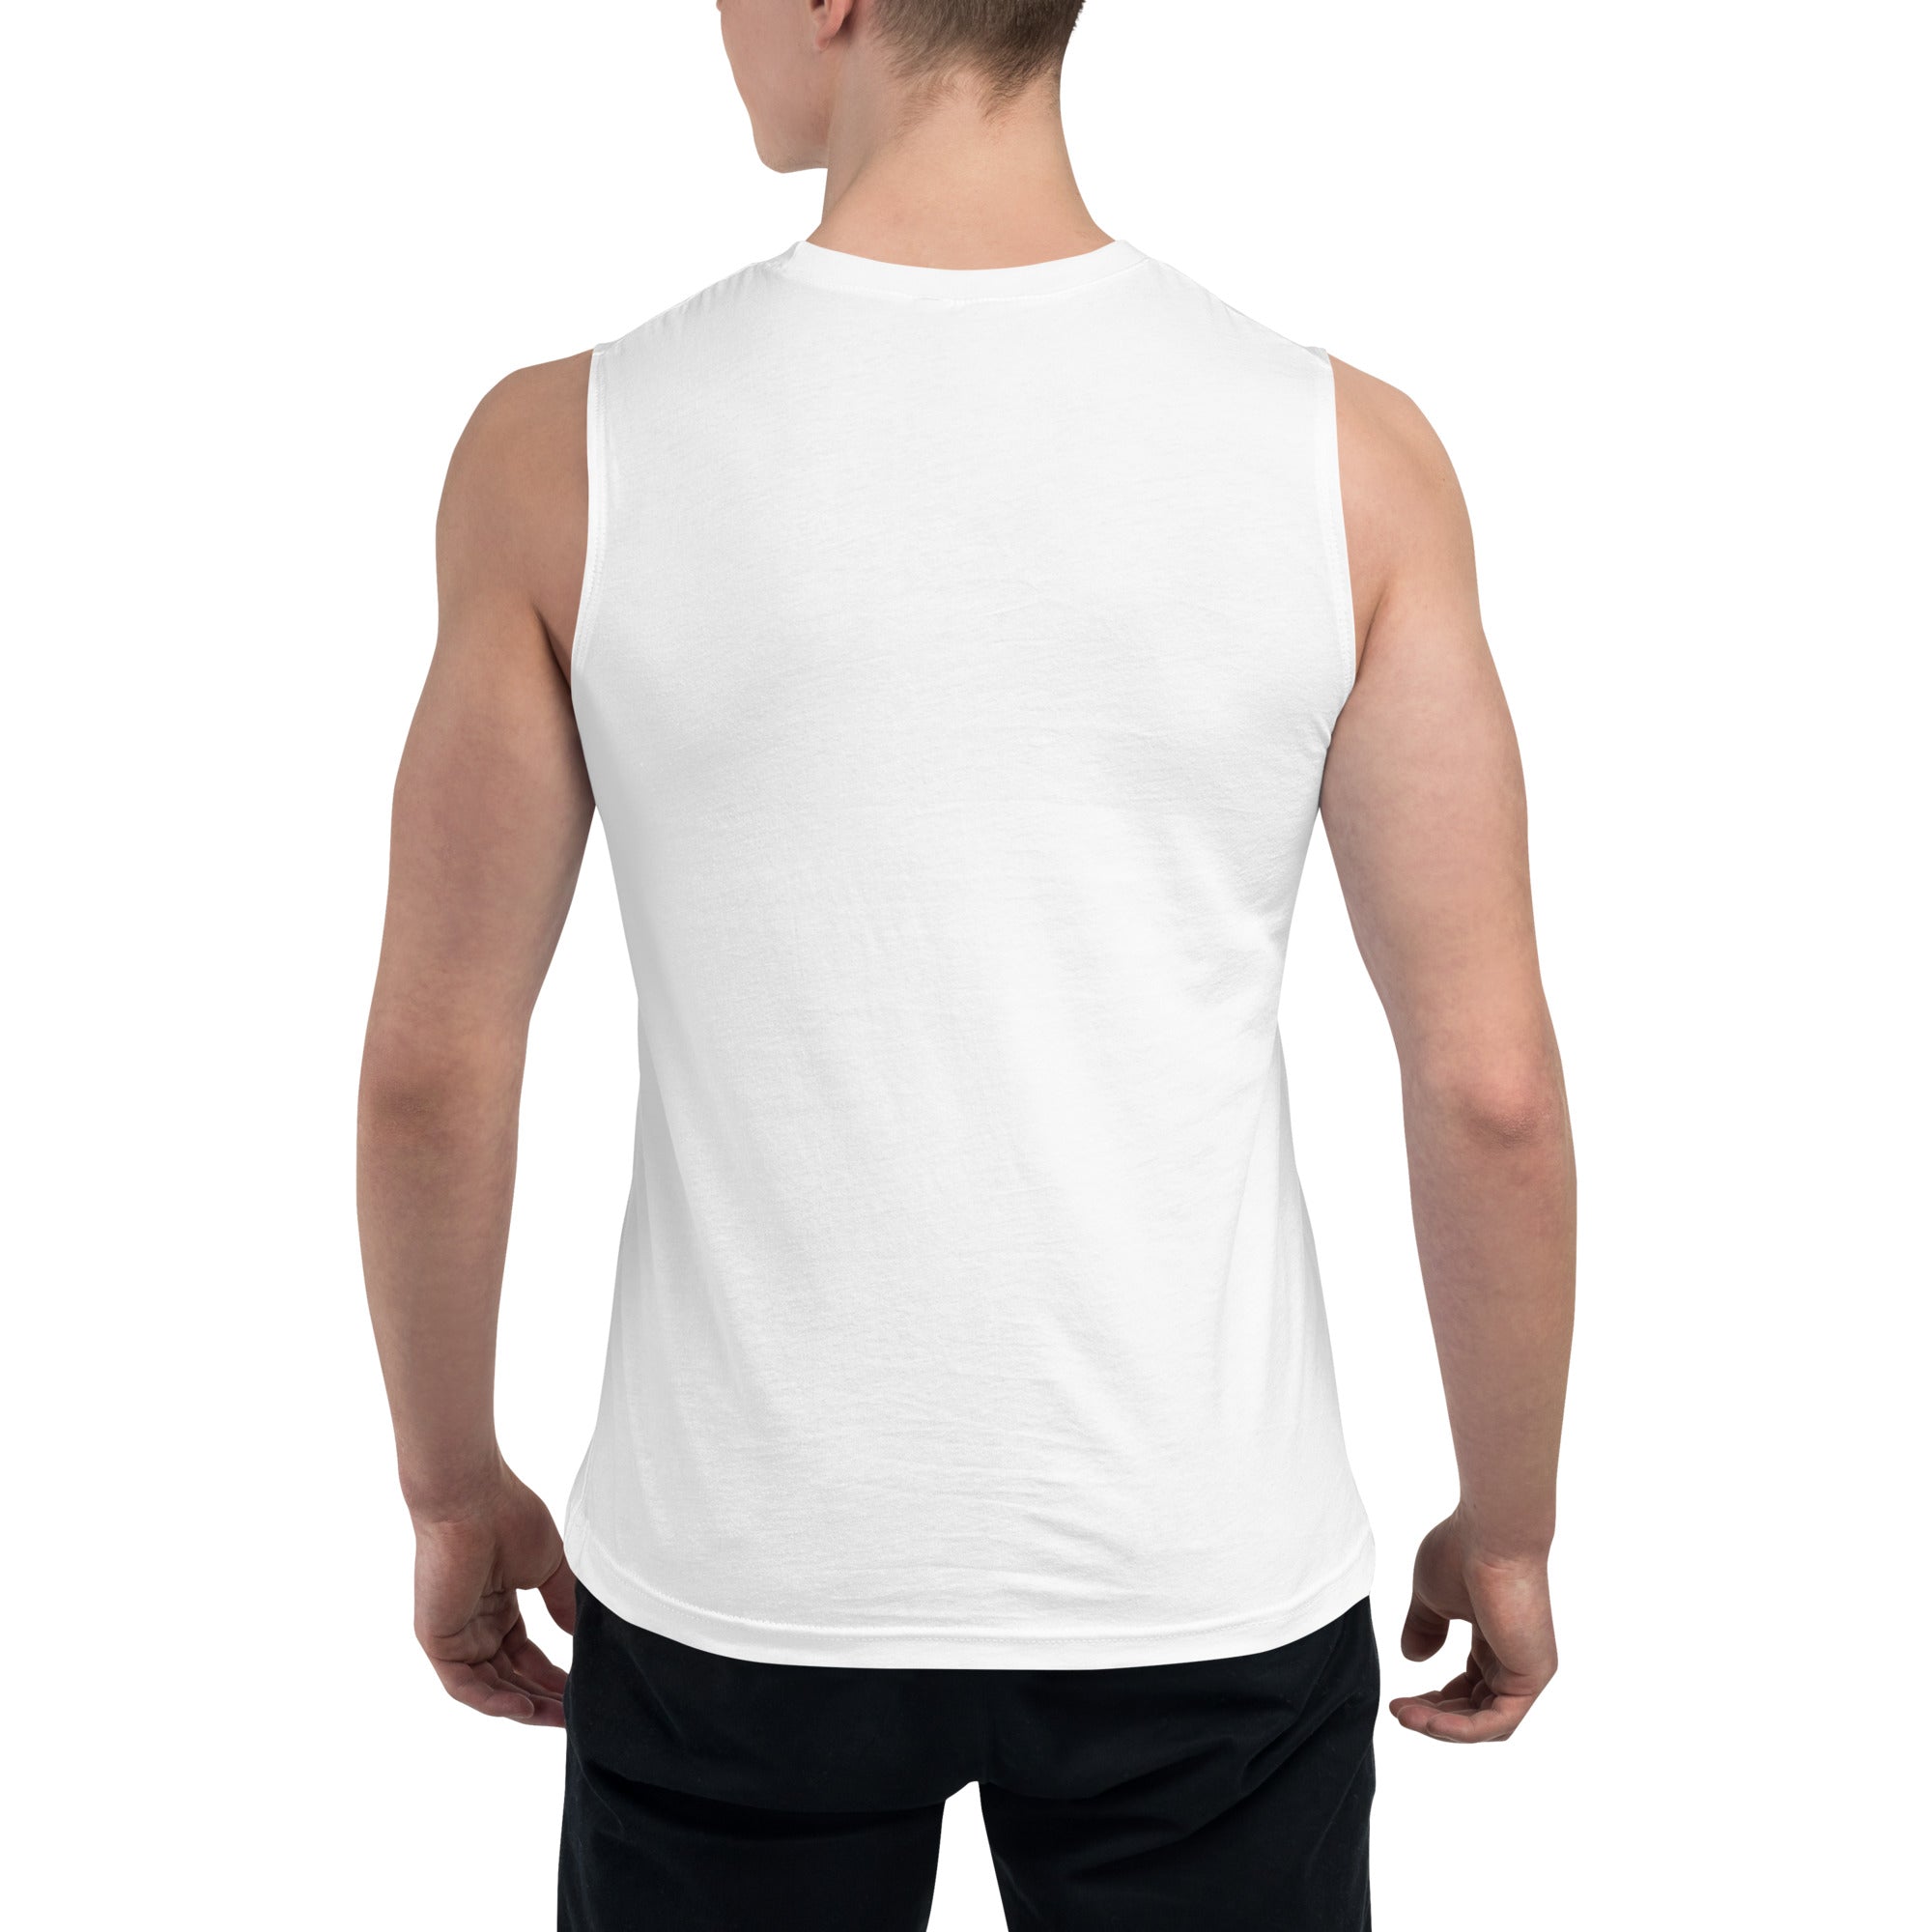 Made in America Men's Muscle Shirt